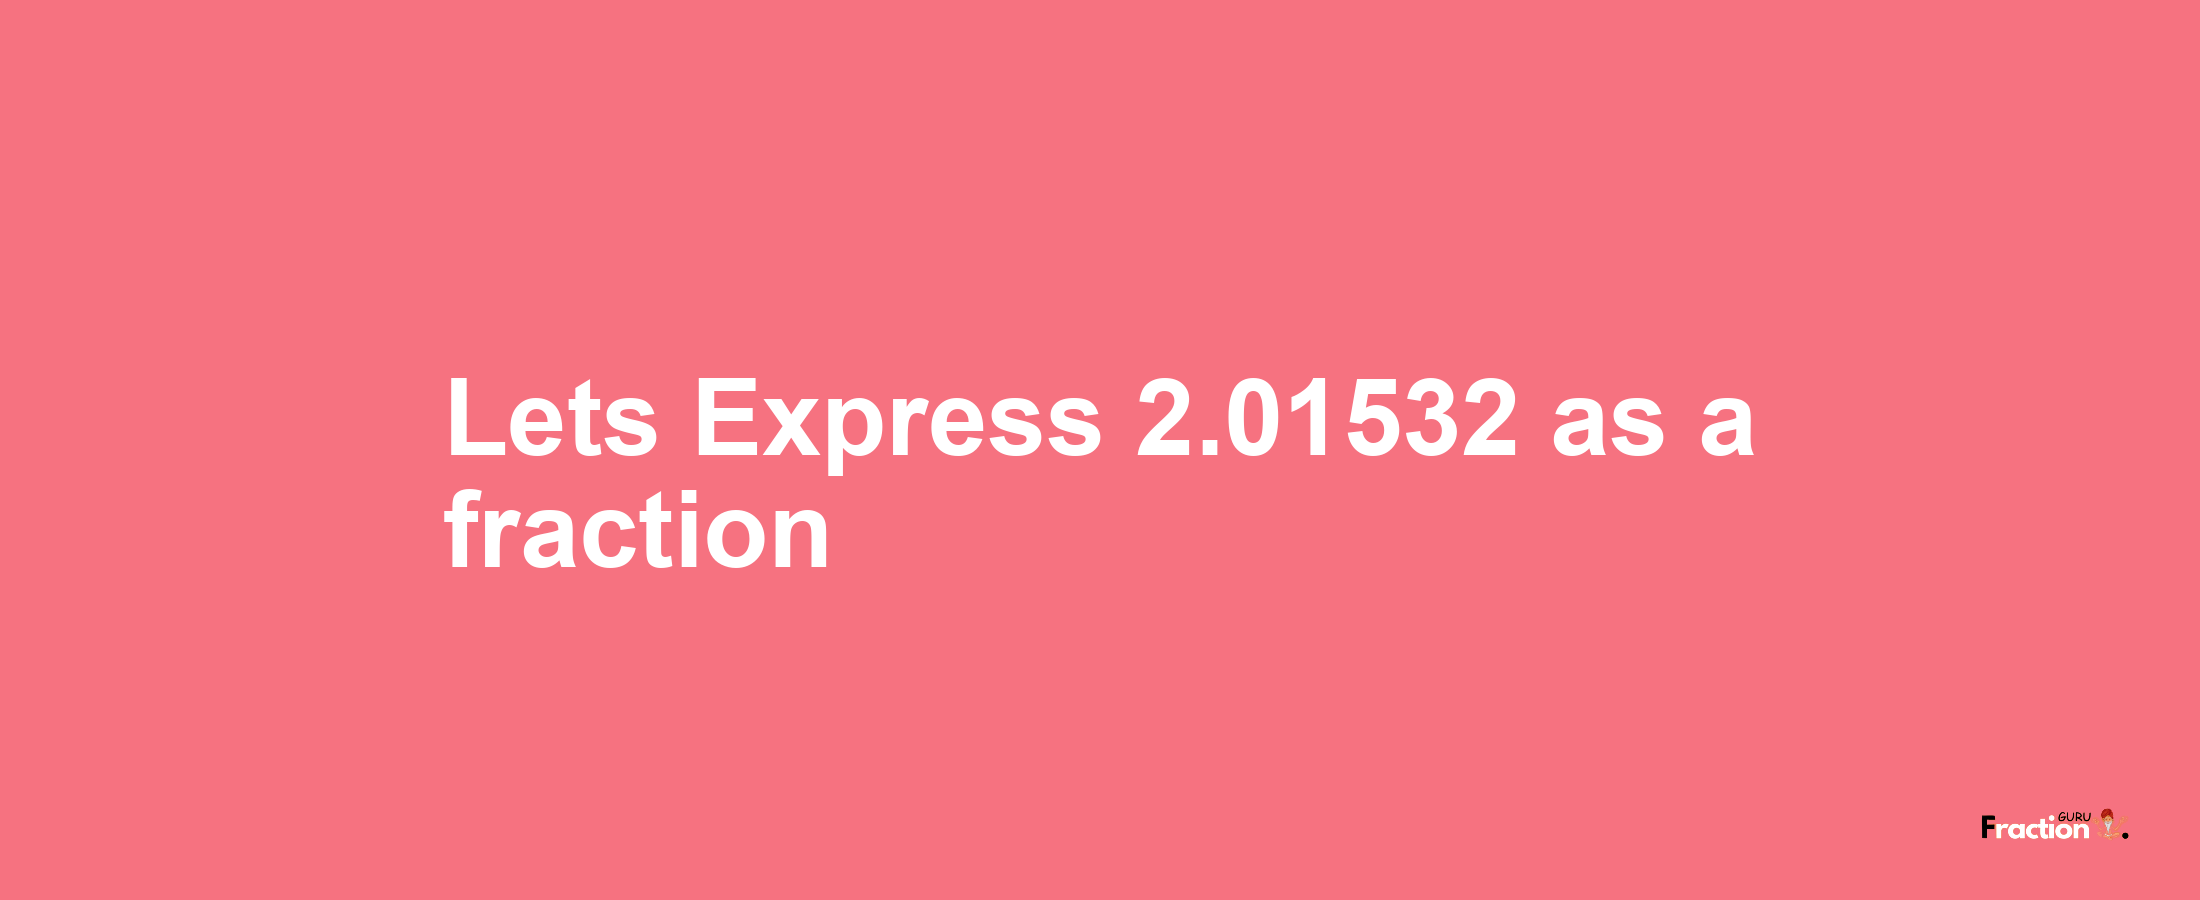 Lets Express 2.01532 as afraction